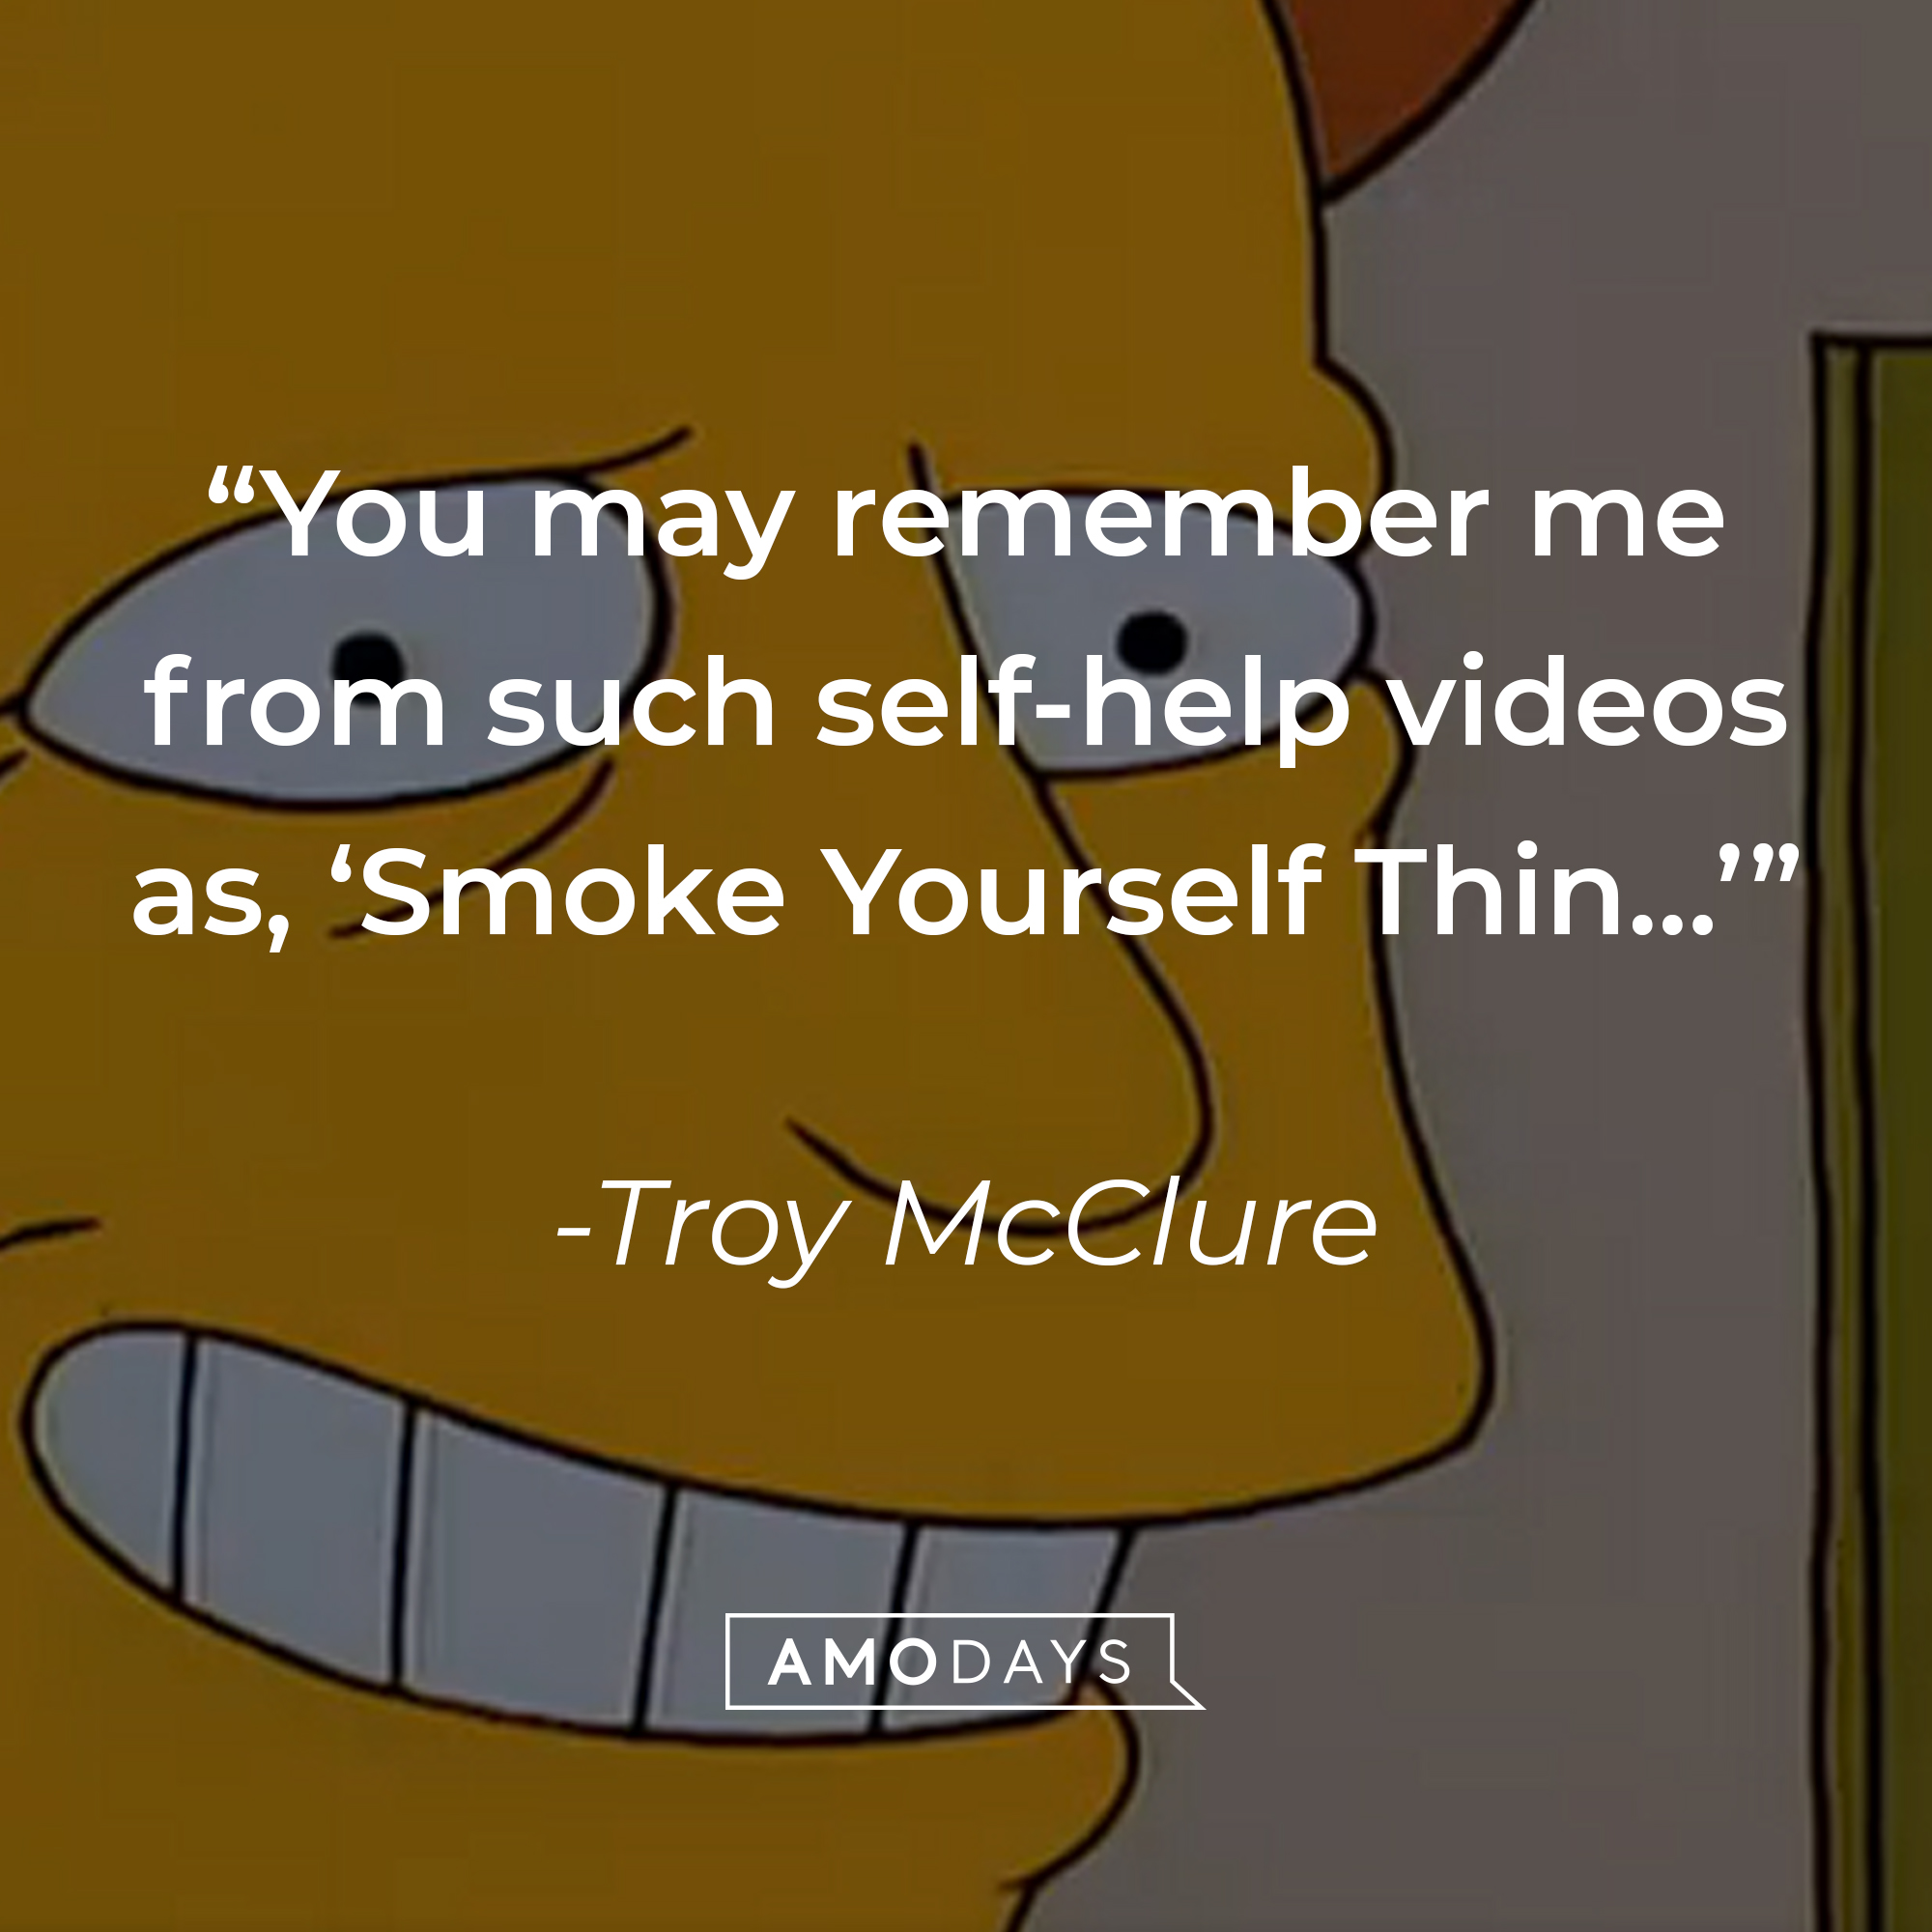 Troy McClure, with his quote: “You may remember me from such self-help videos as ‘Smoke Yourself Thin...'" | Source: facebook.com/TheSimpsons